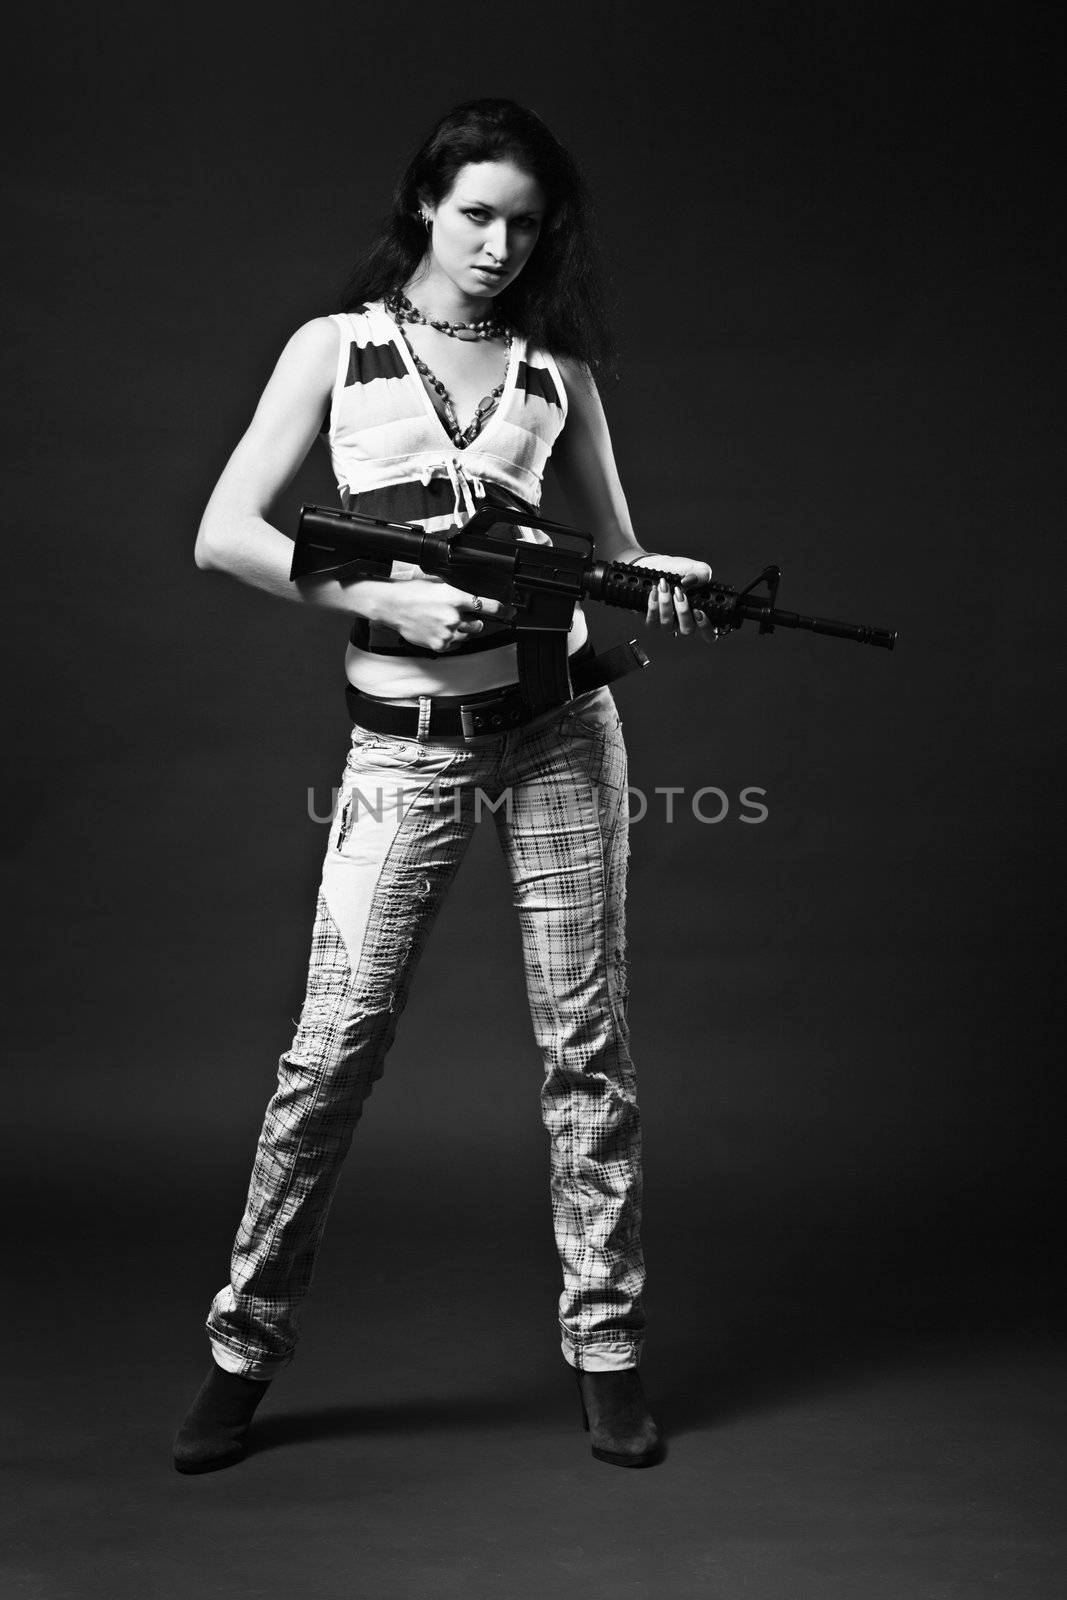 Girl holding a rifle - monochrome picture by pzaxe